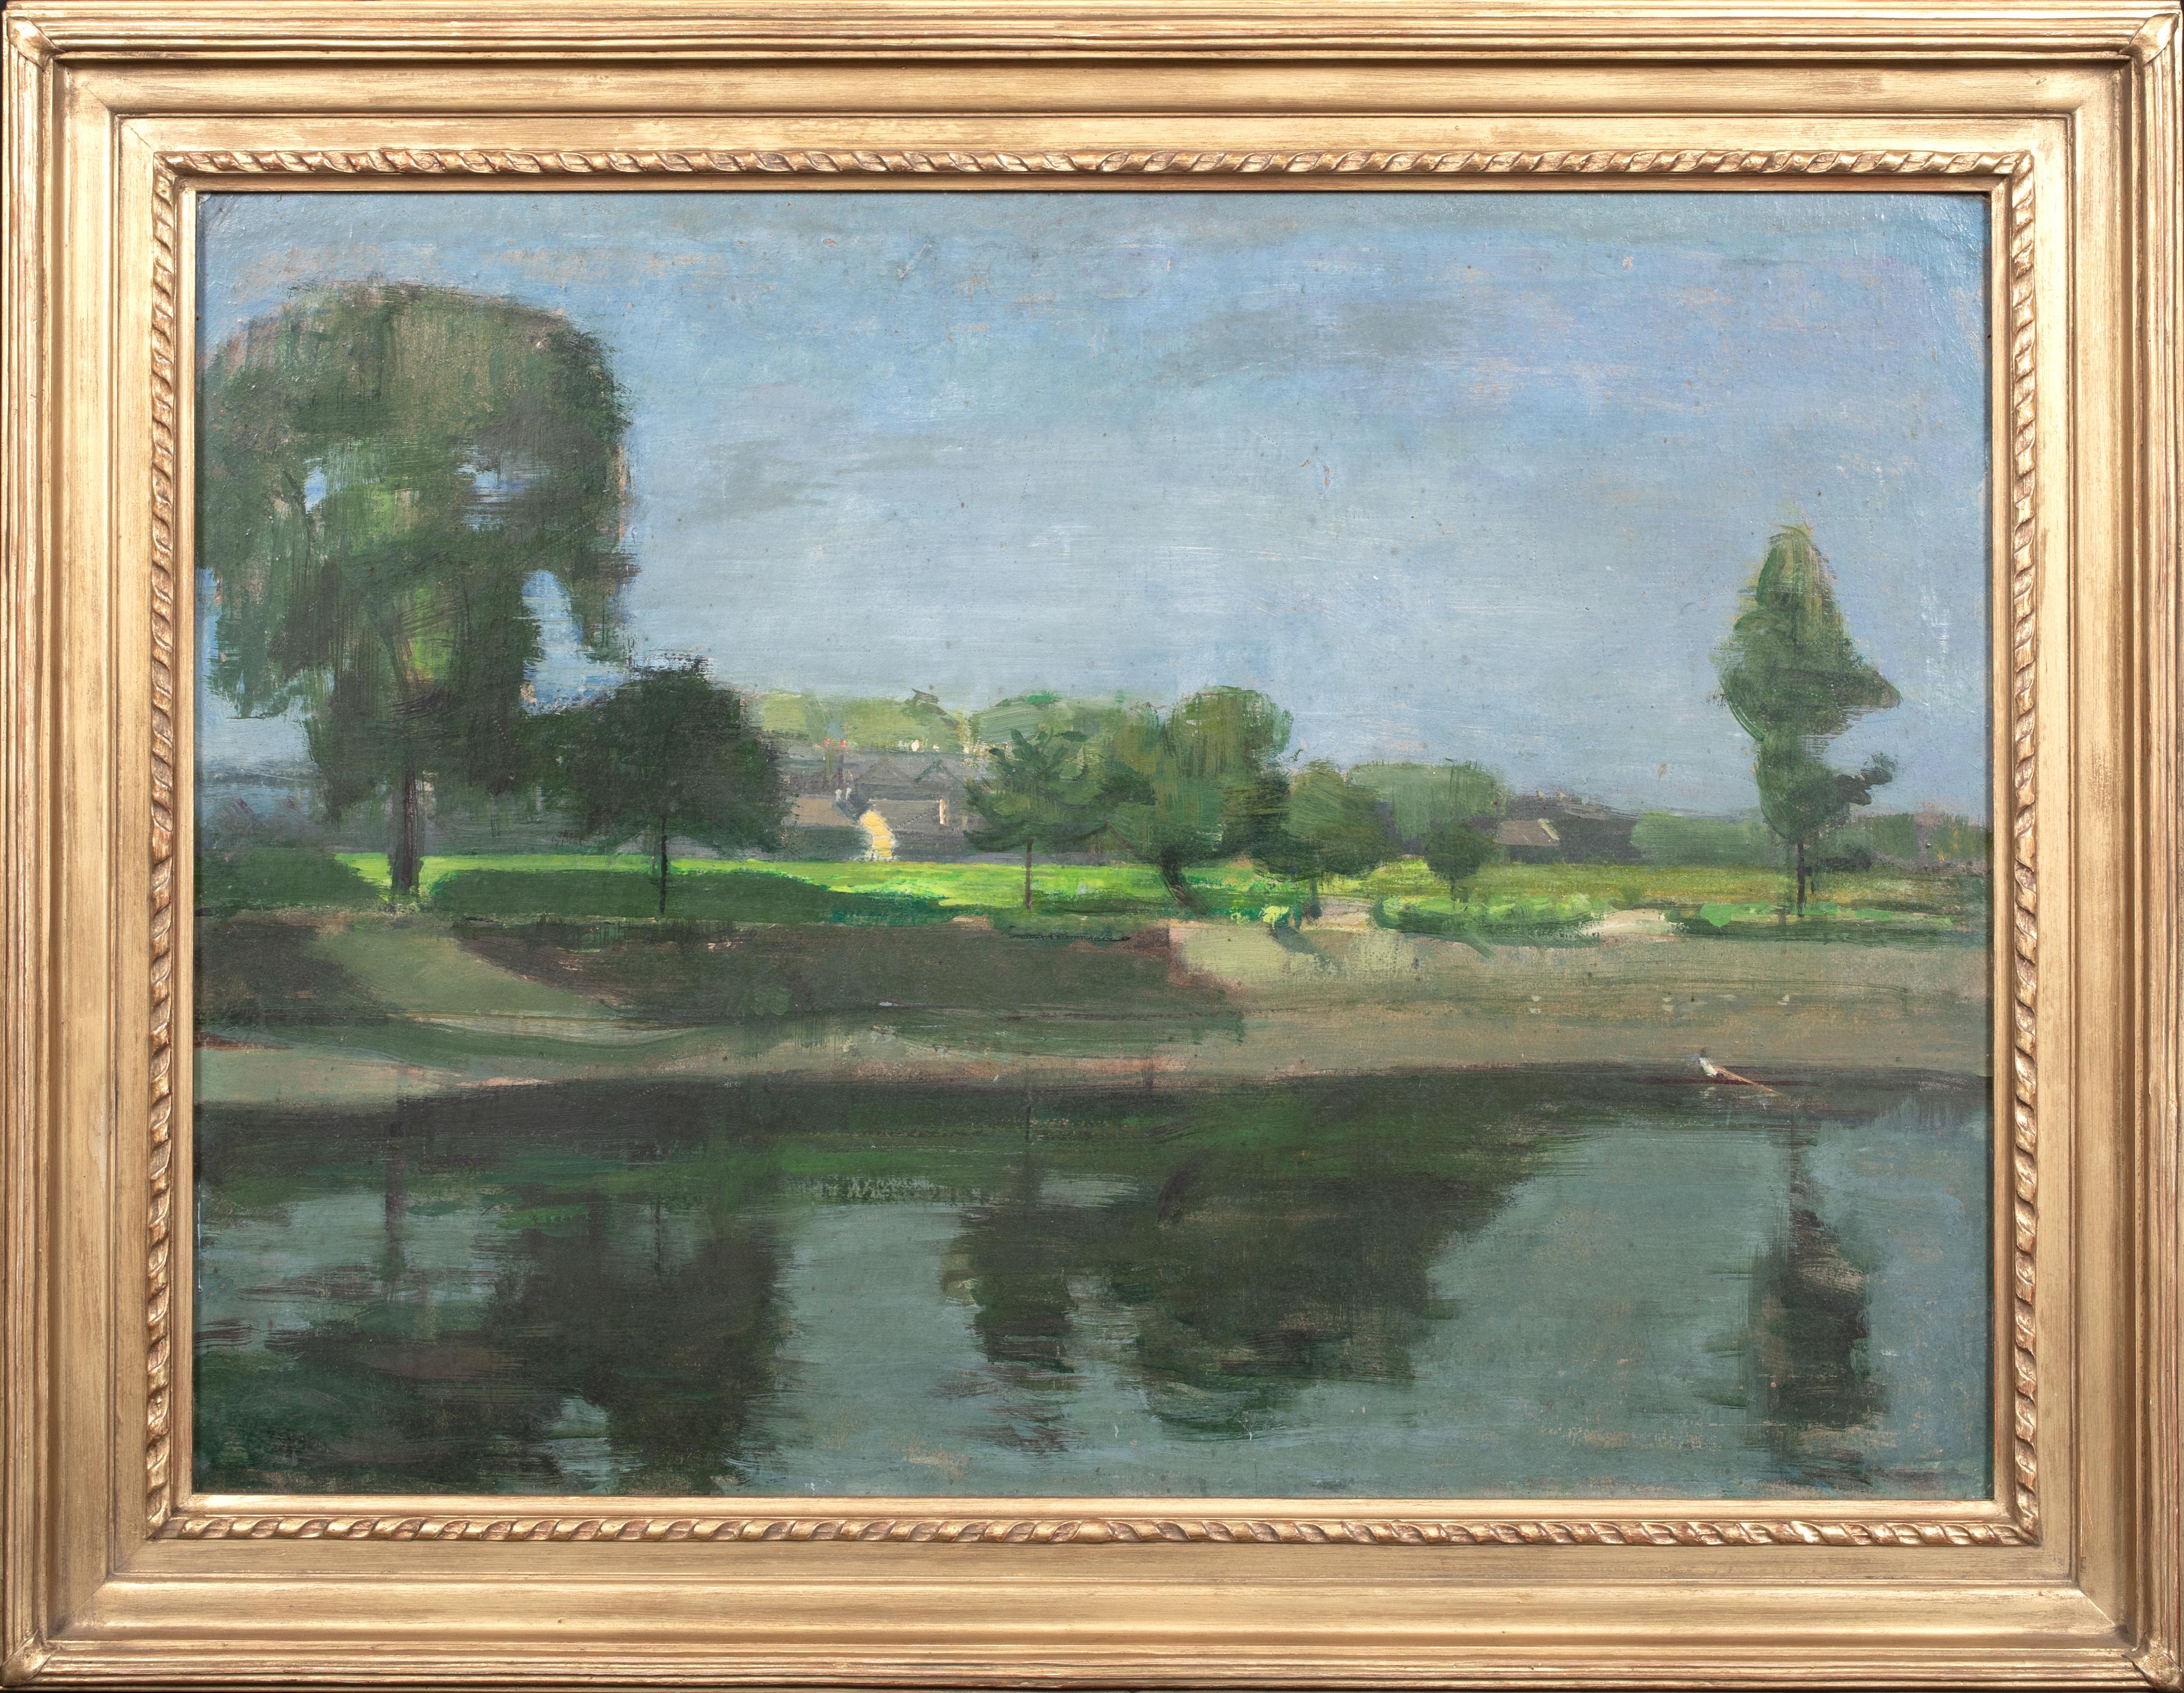 Ruskin Spear Landscape Painting - Morning On The River Thames, Barnes, circa 1935